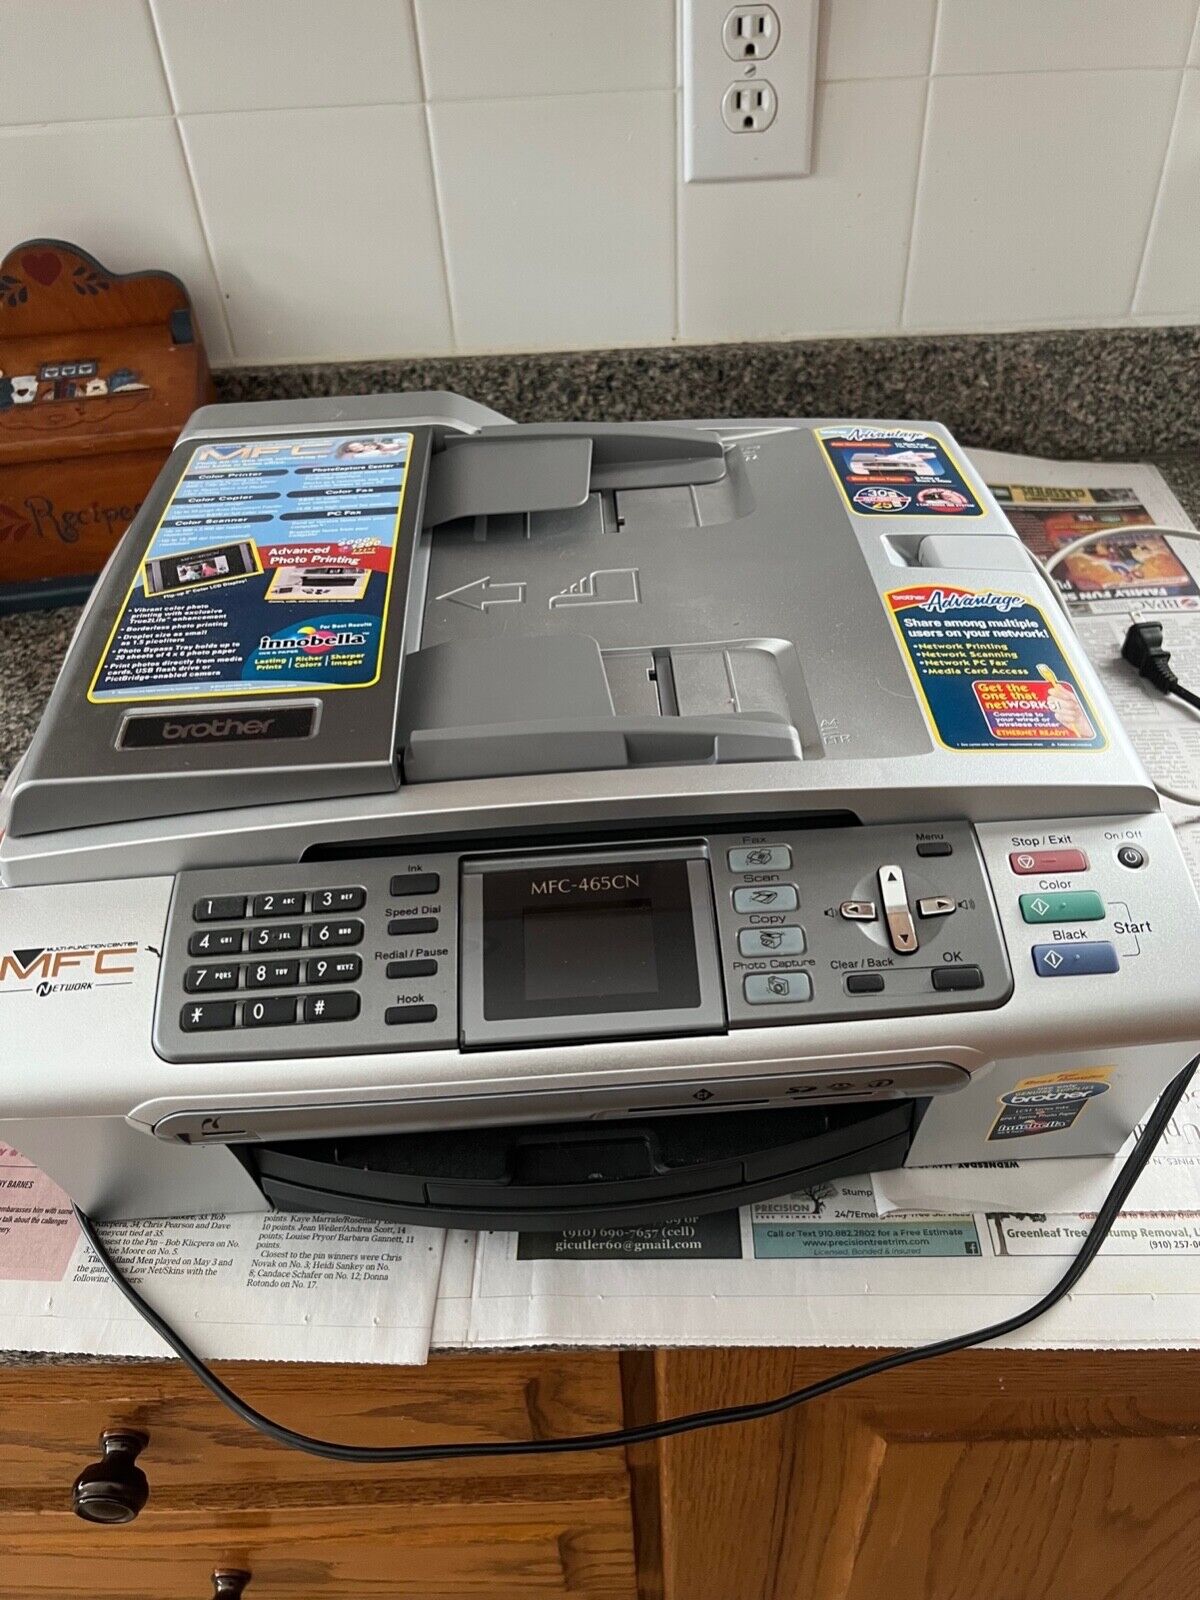 Brother MFC-465cn All-In-One ,Color Printer,Copier,Scanner,PC Fax, Exc condition